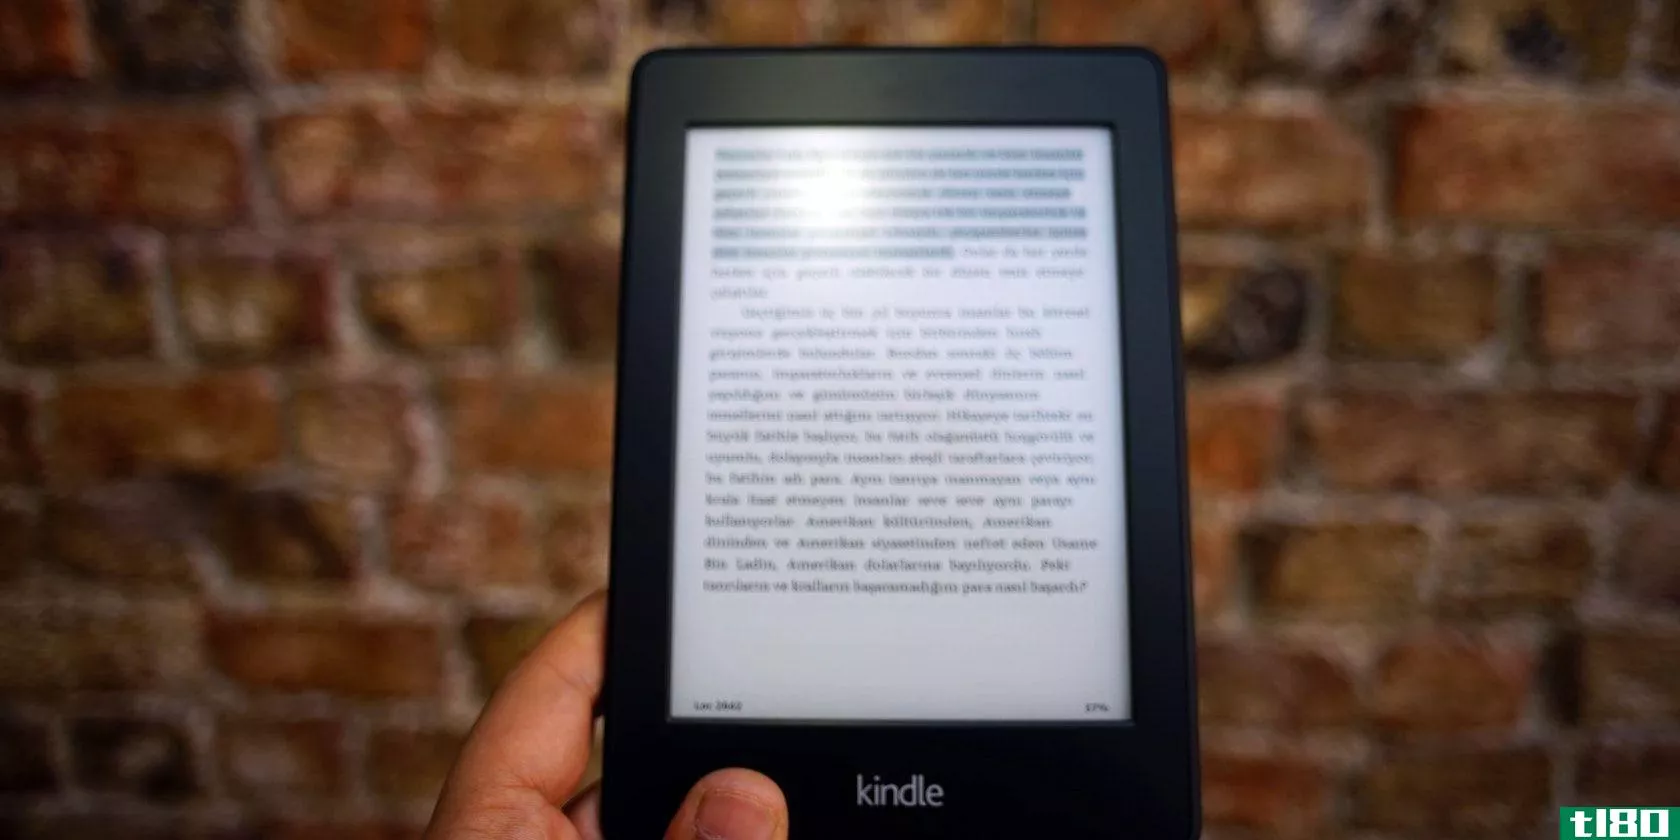 A hand holding a Kindle in the foreground with a brick wall in the background